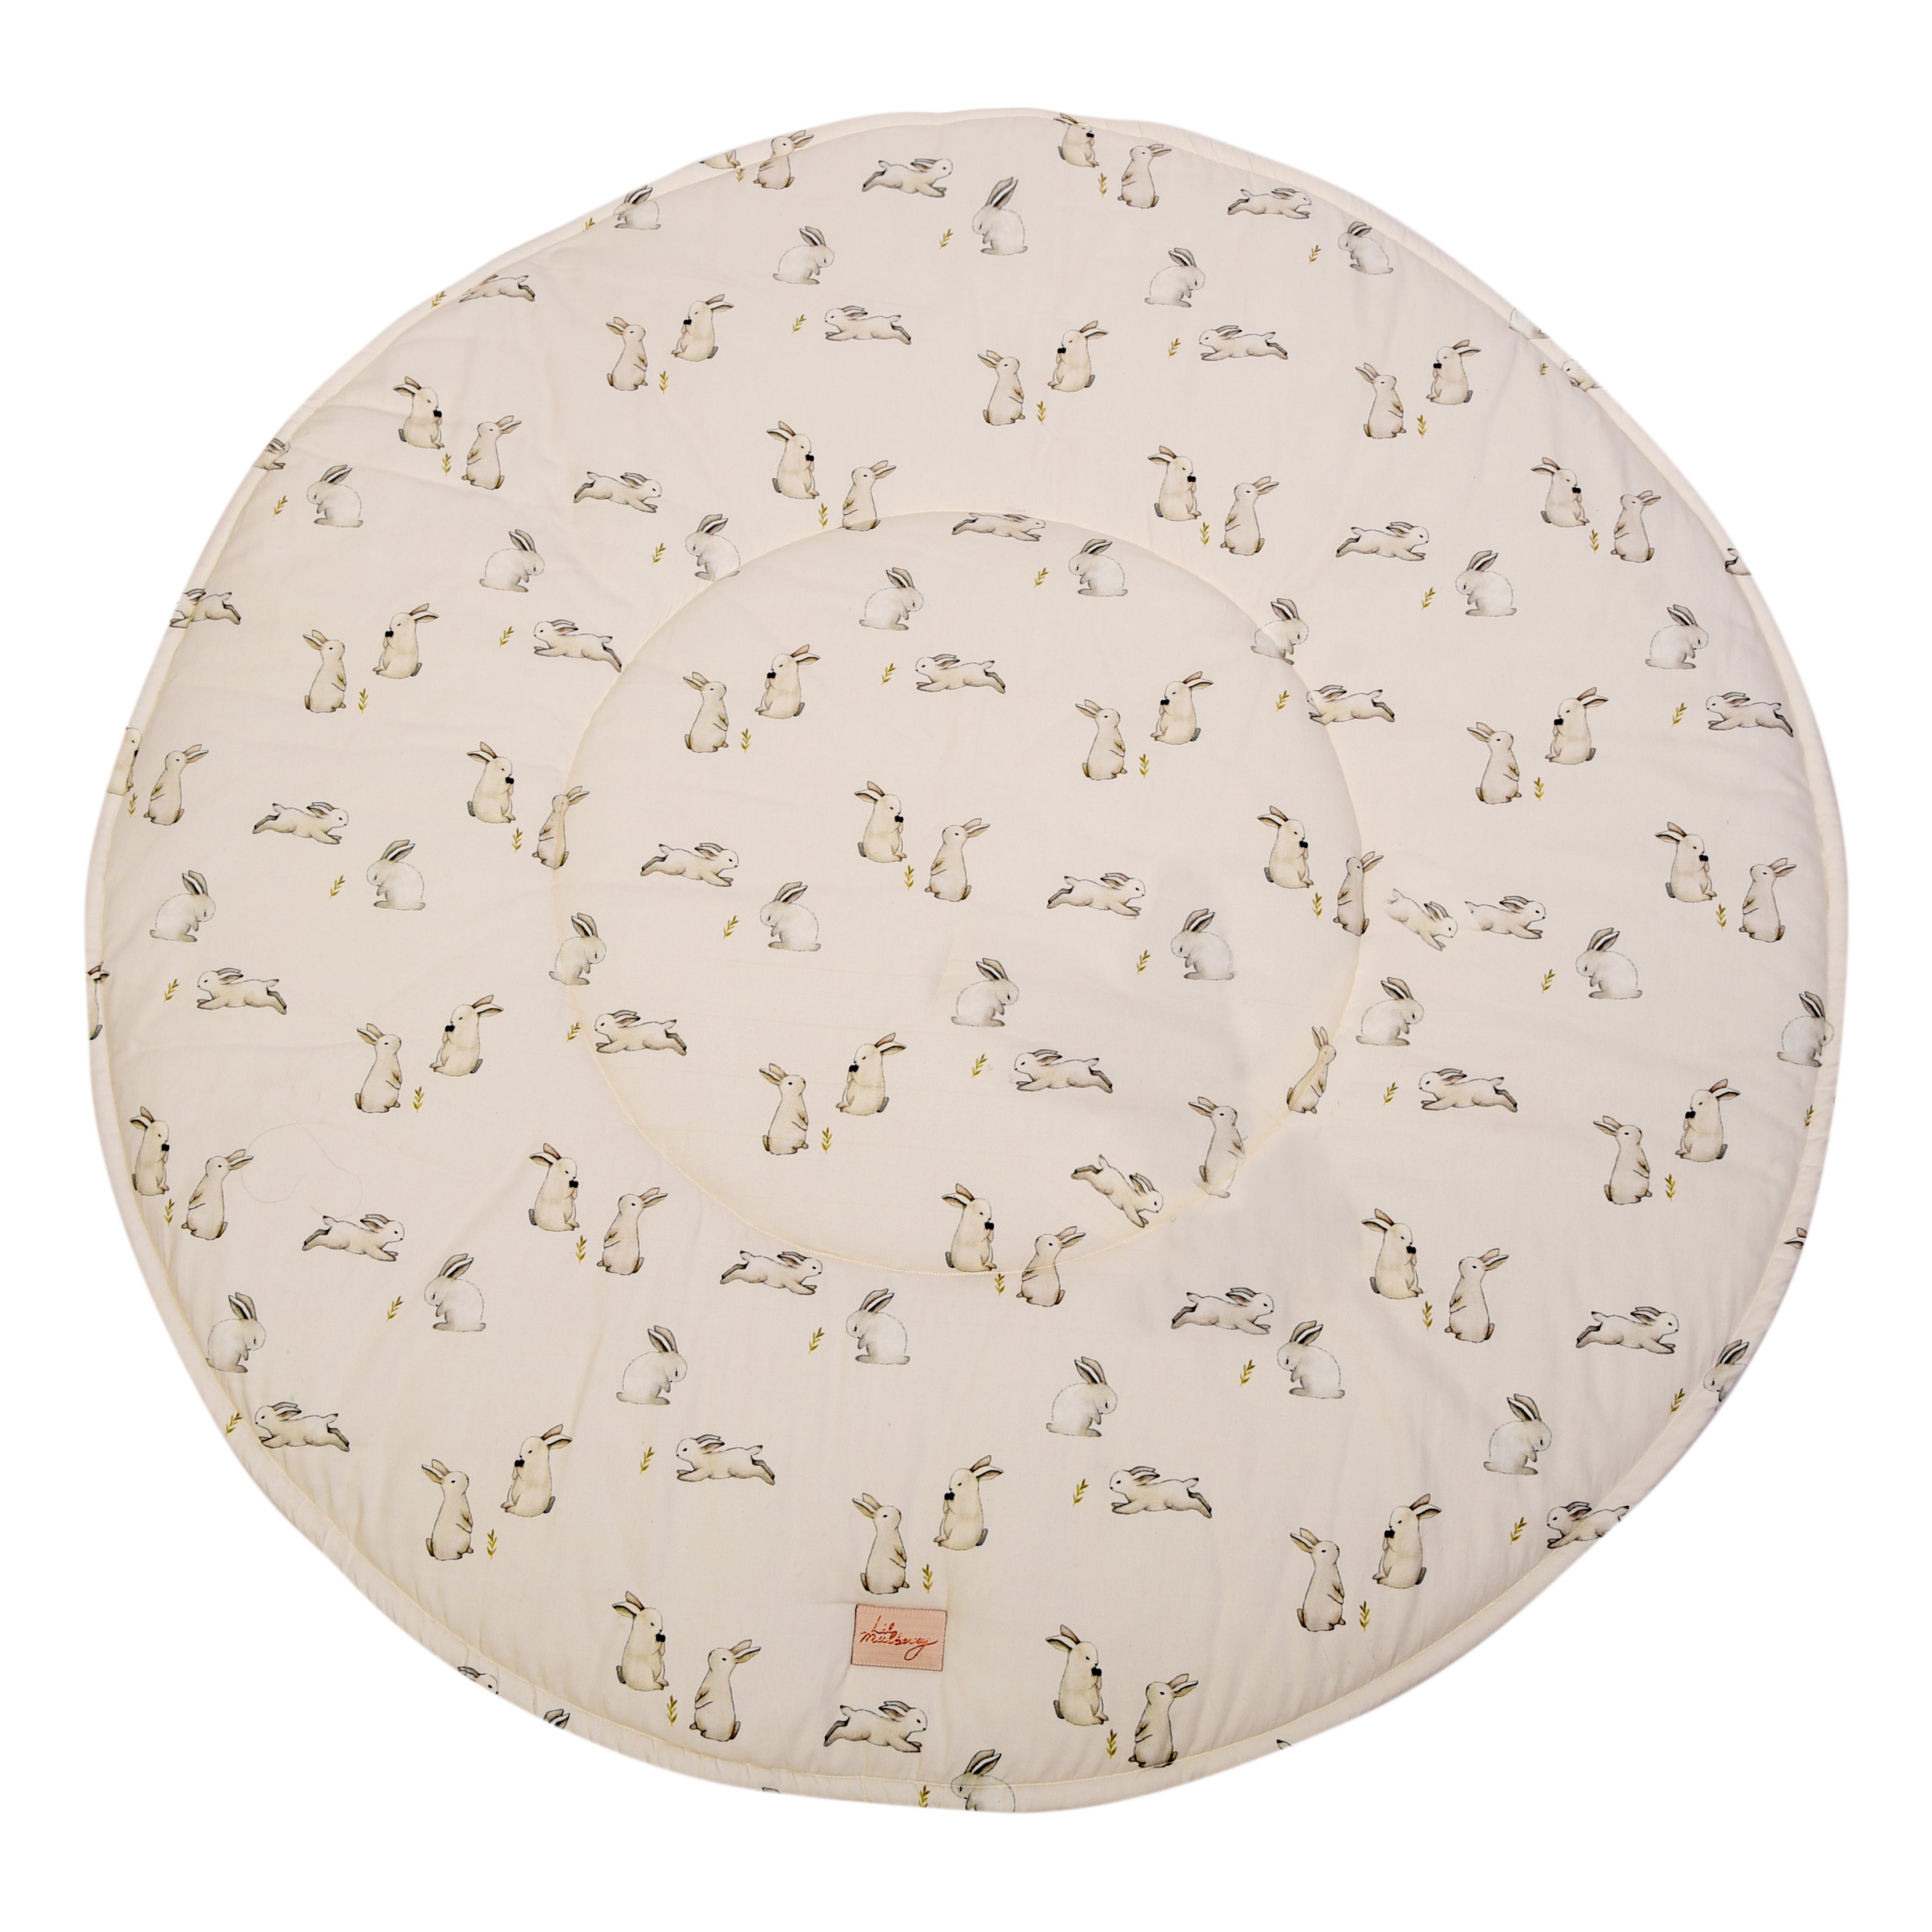 Enchanted Bunny Play Mat - Lil Mulberry